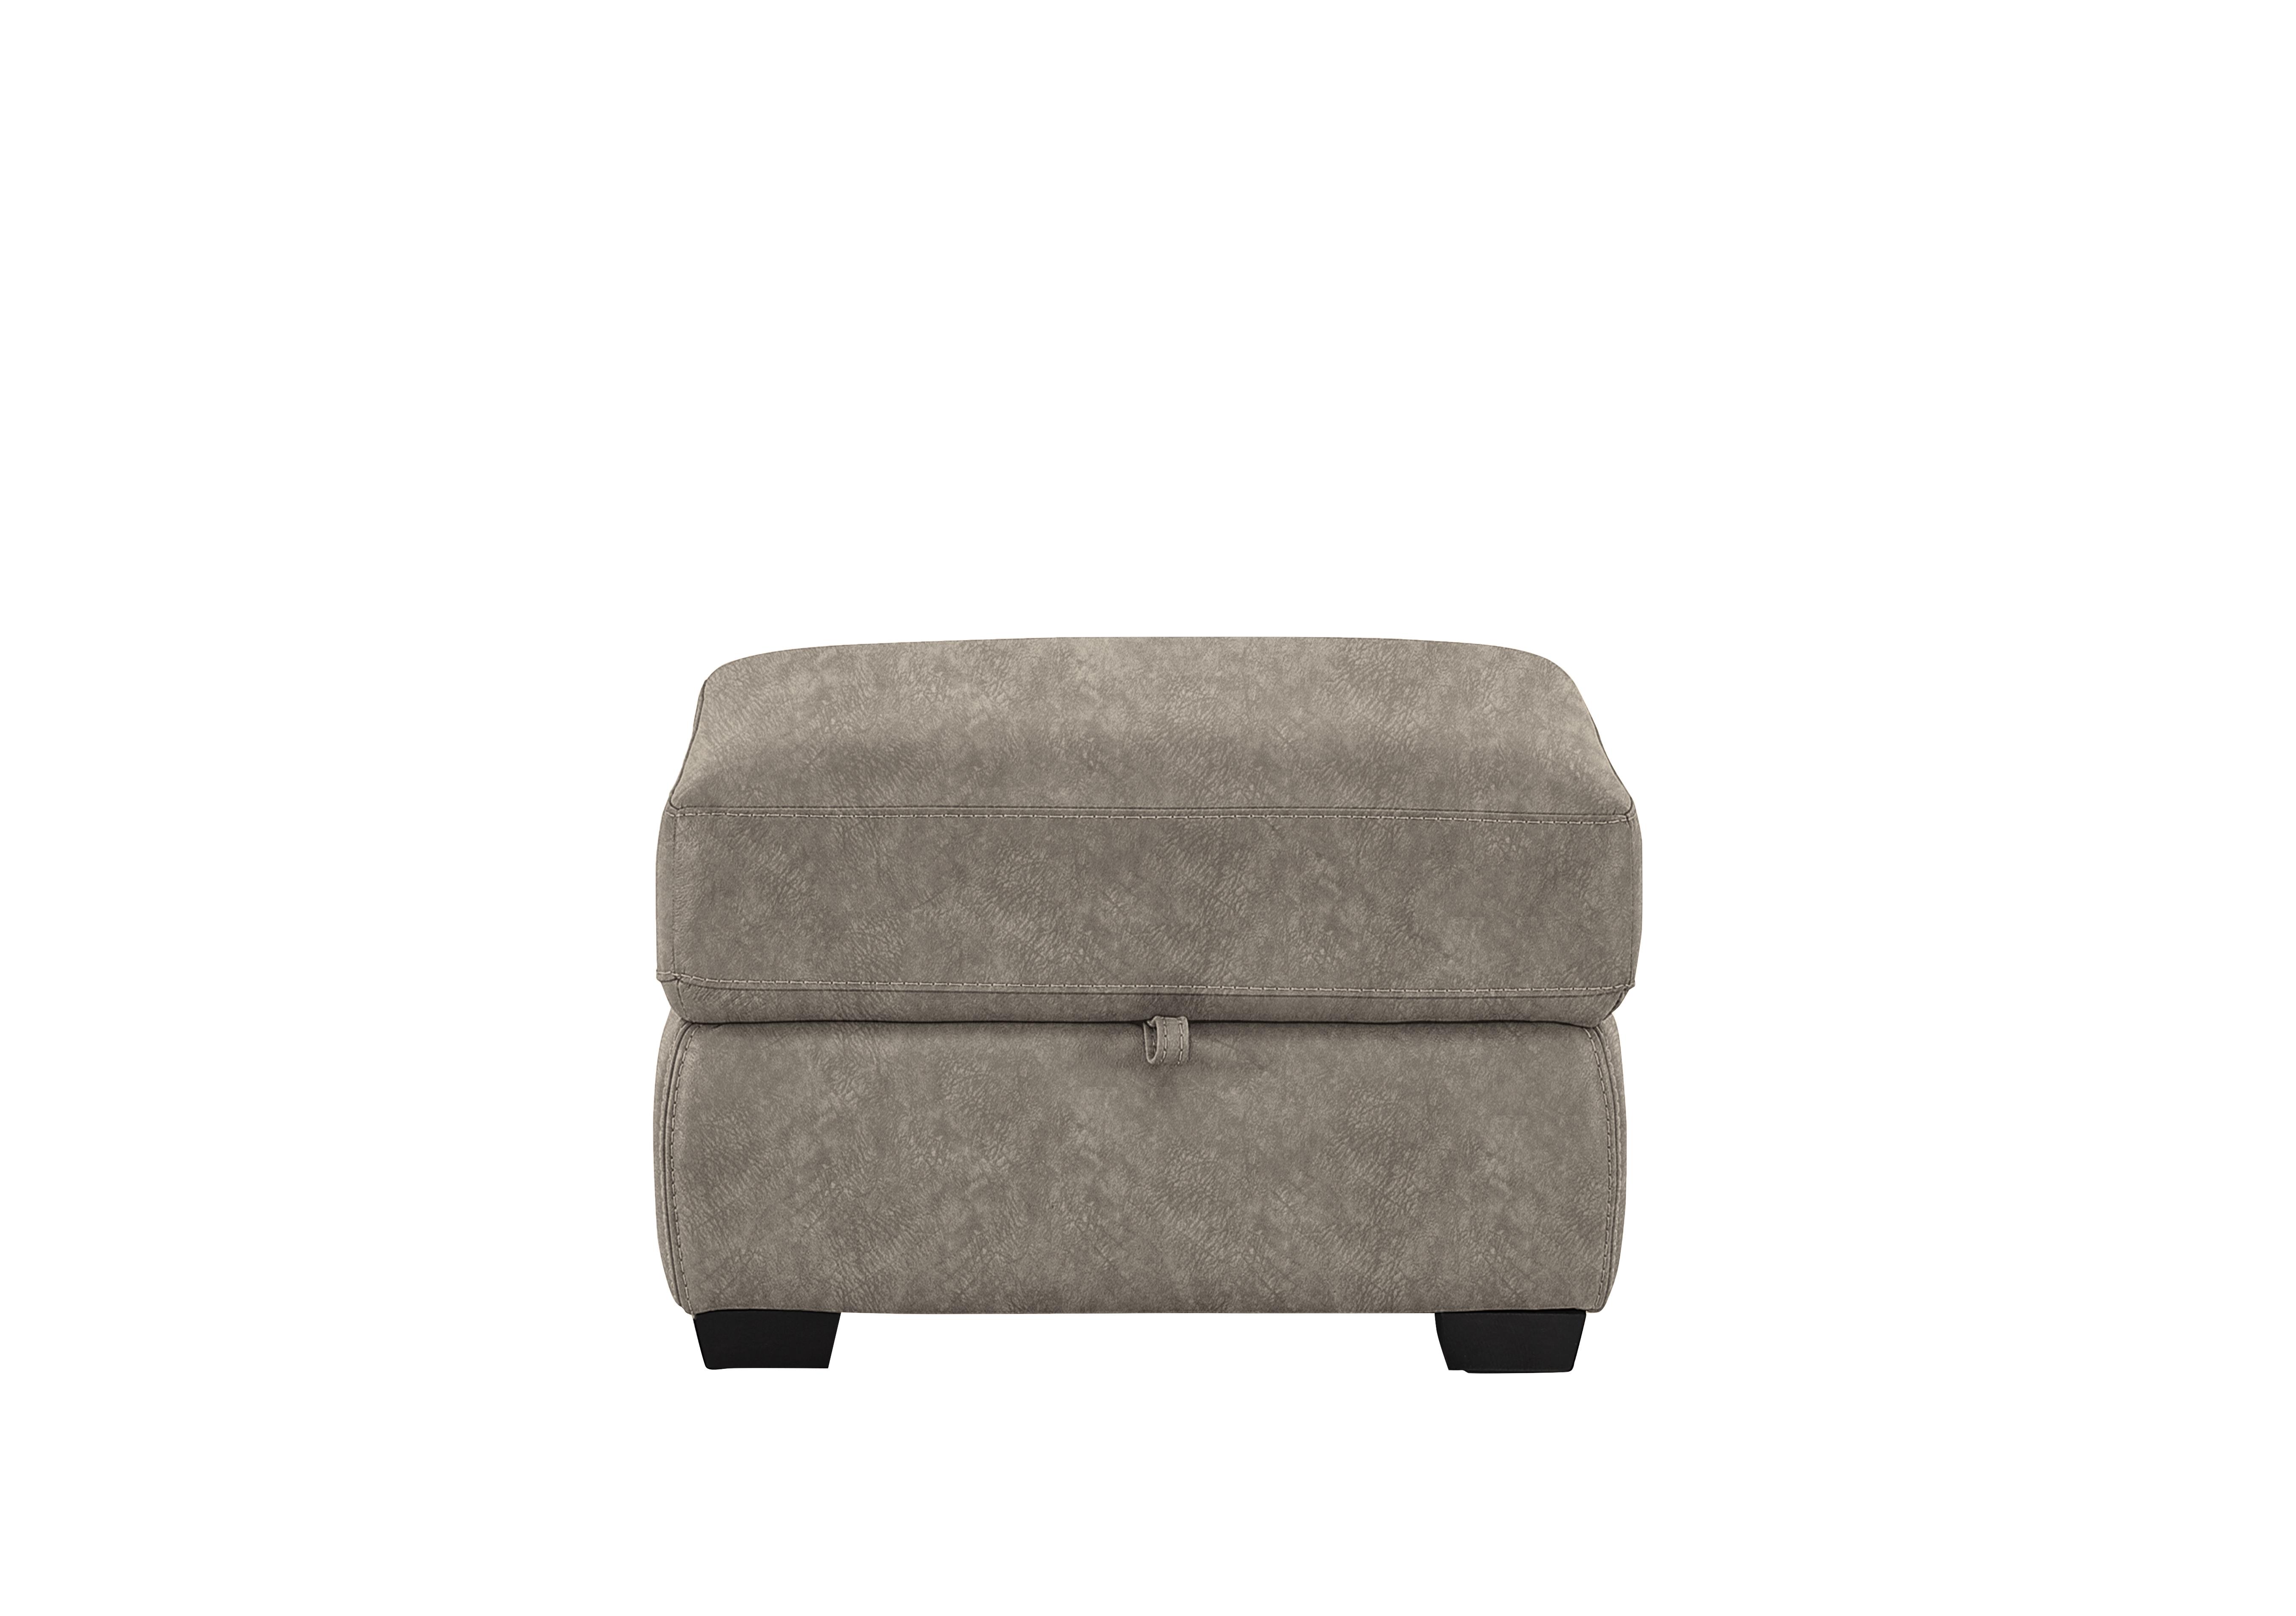 Compact Collection Petit Fabric Storage Footstool in Bfa-Bnn-R29 Fv1 Mink on Furniture Village